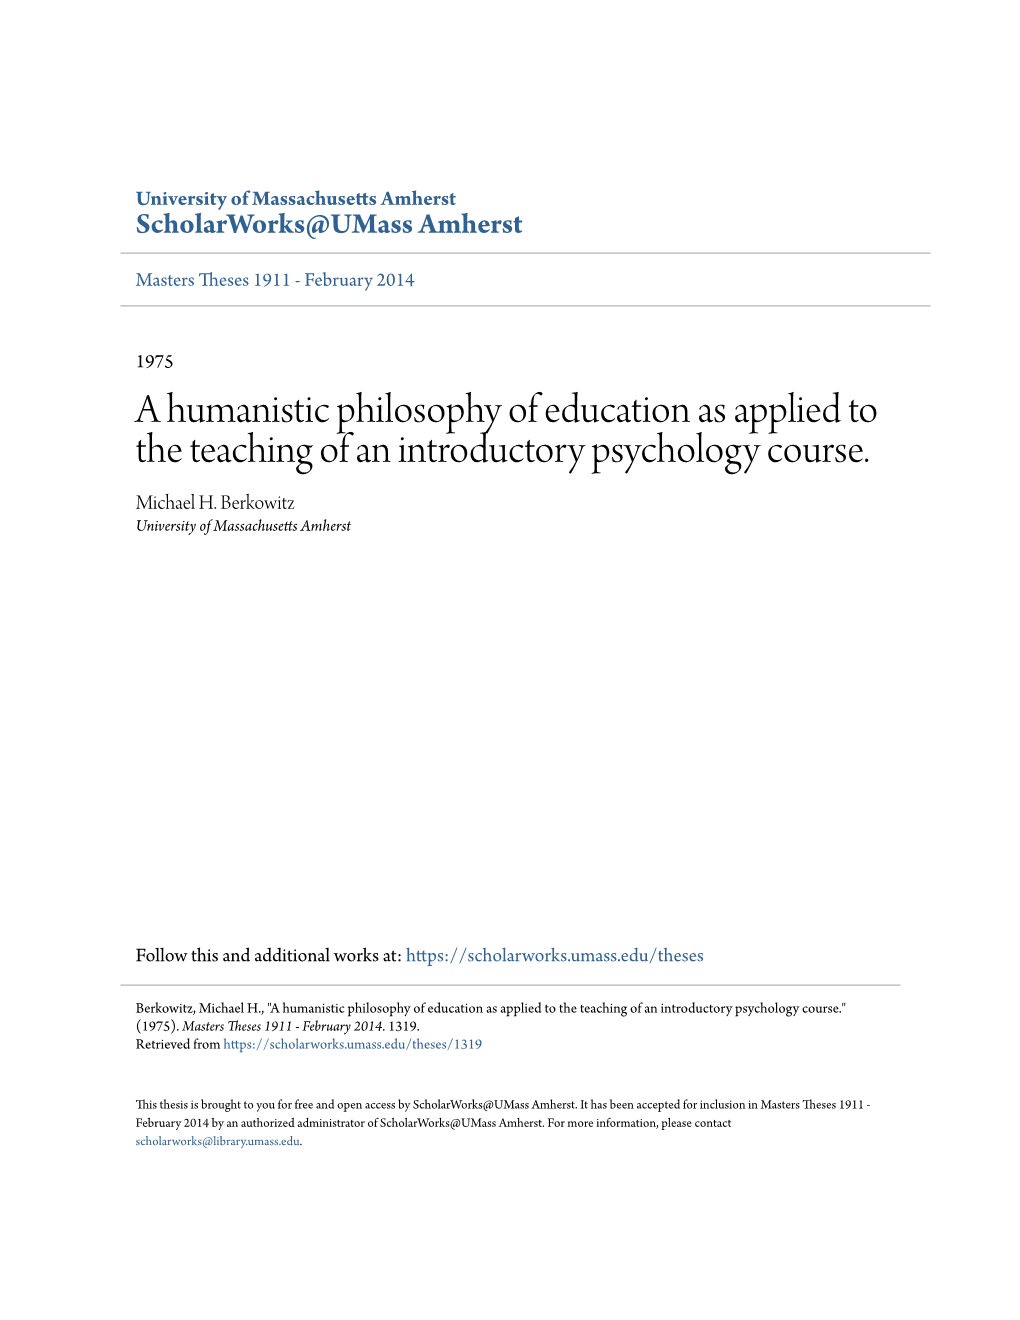 A Humanistic Philosophy of Education As Applied to the Teaching of an Introductory Psychology Course